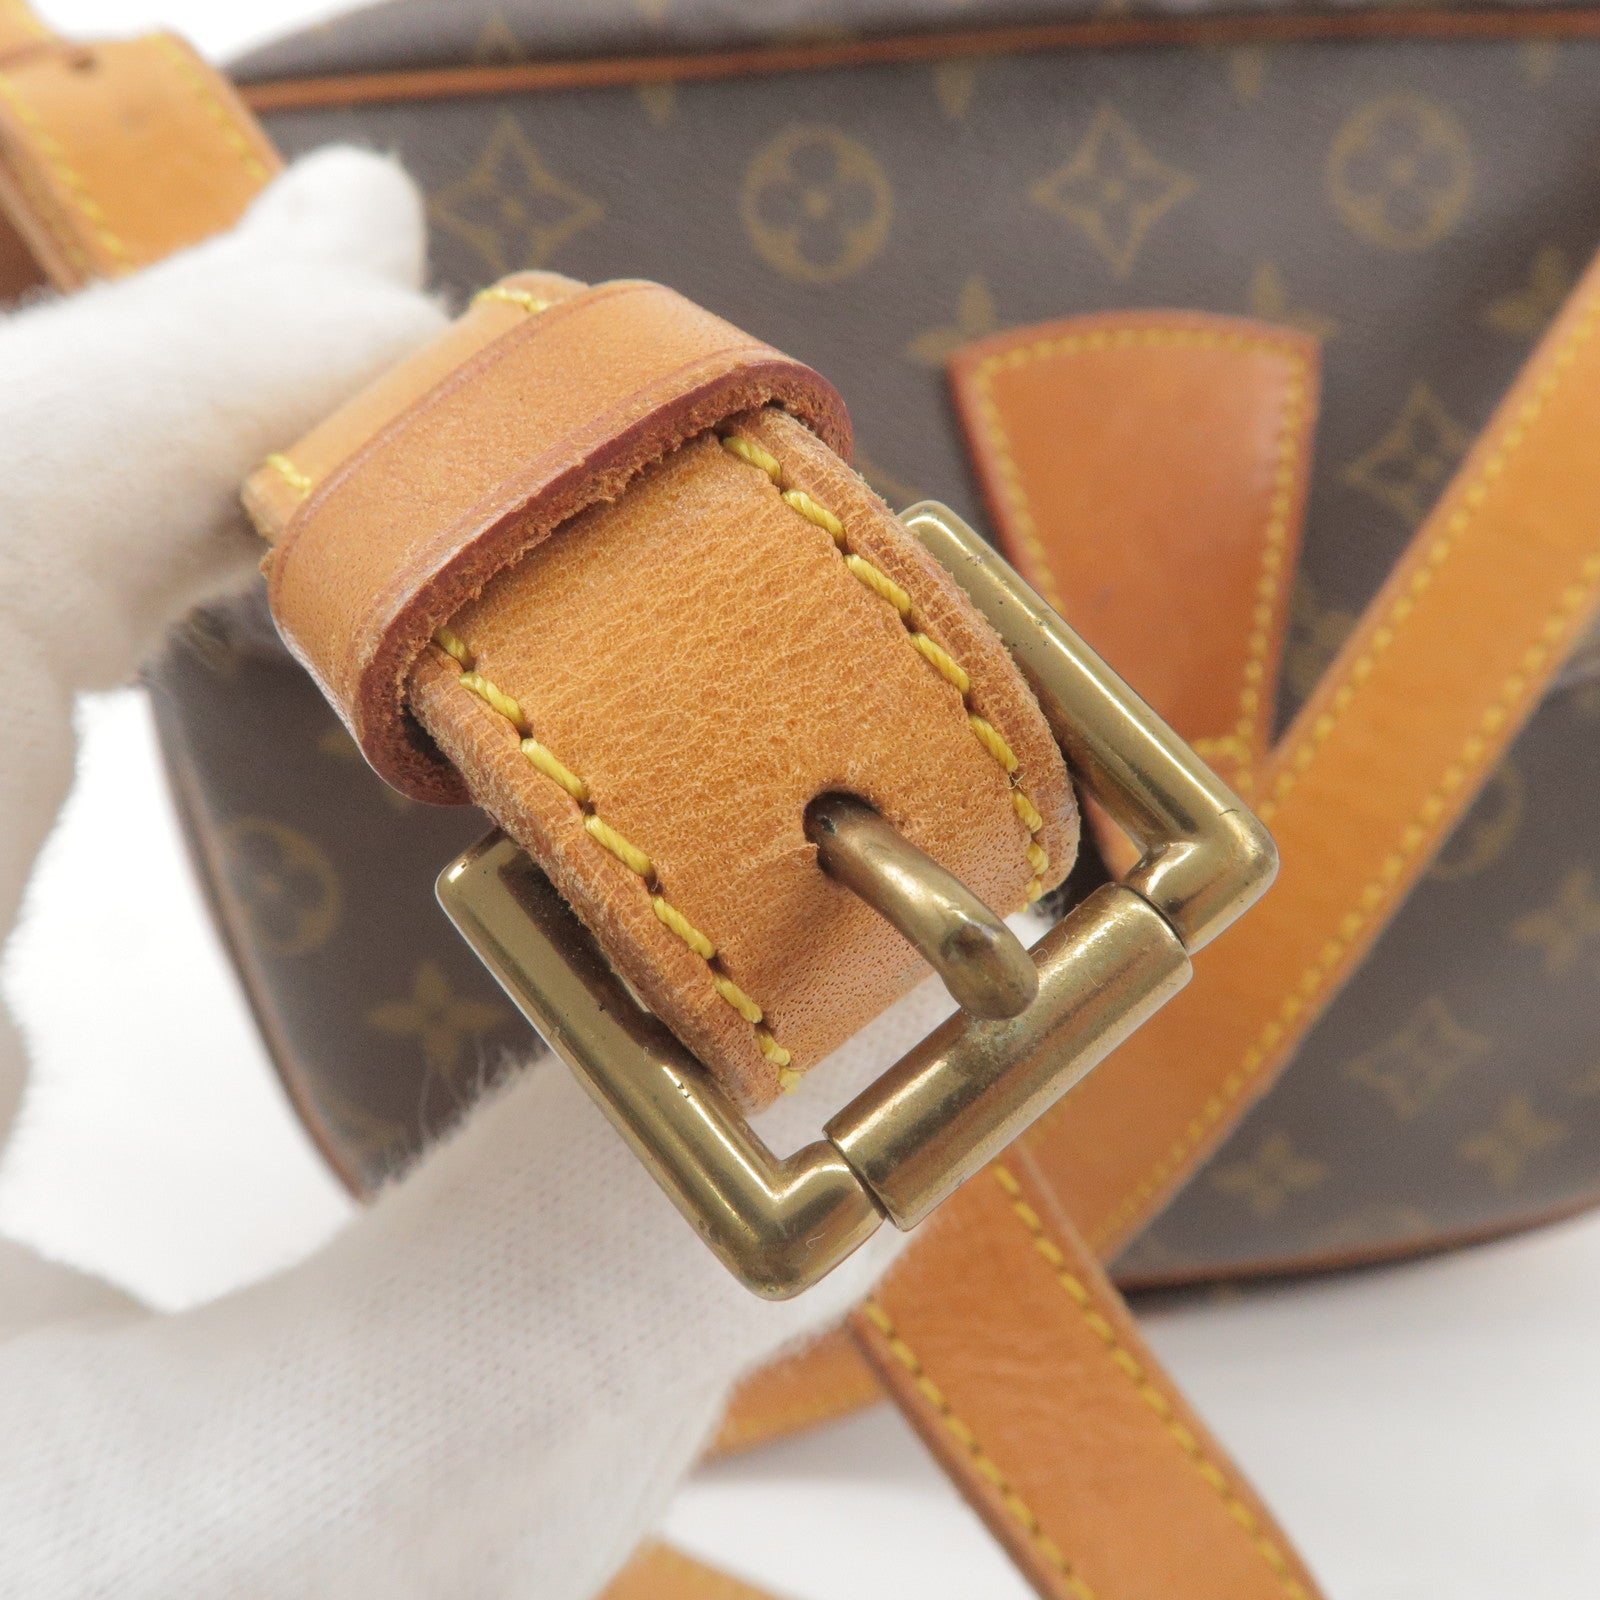 Canvas and gold leather hand-bag with belt and buckle Louis